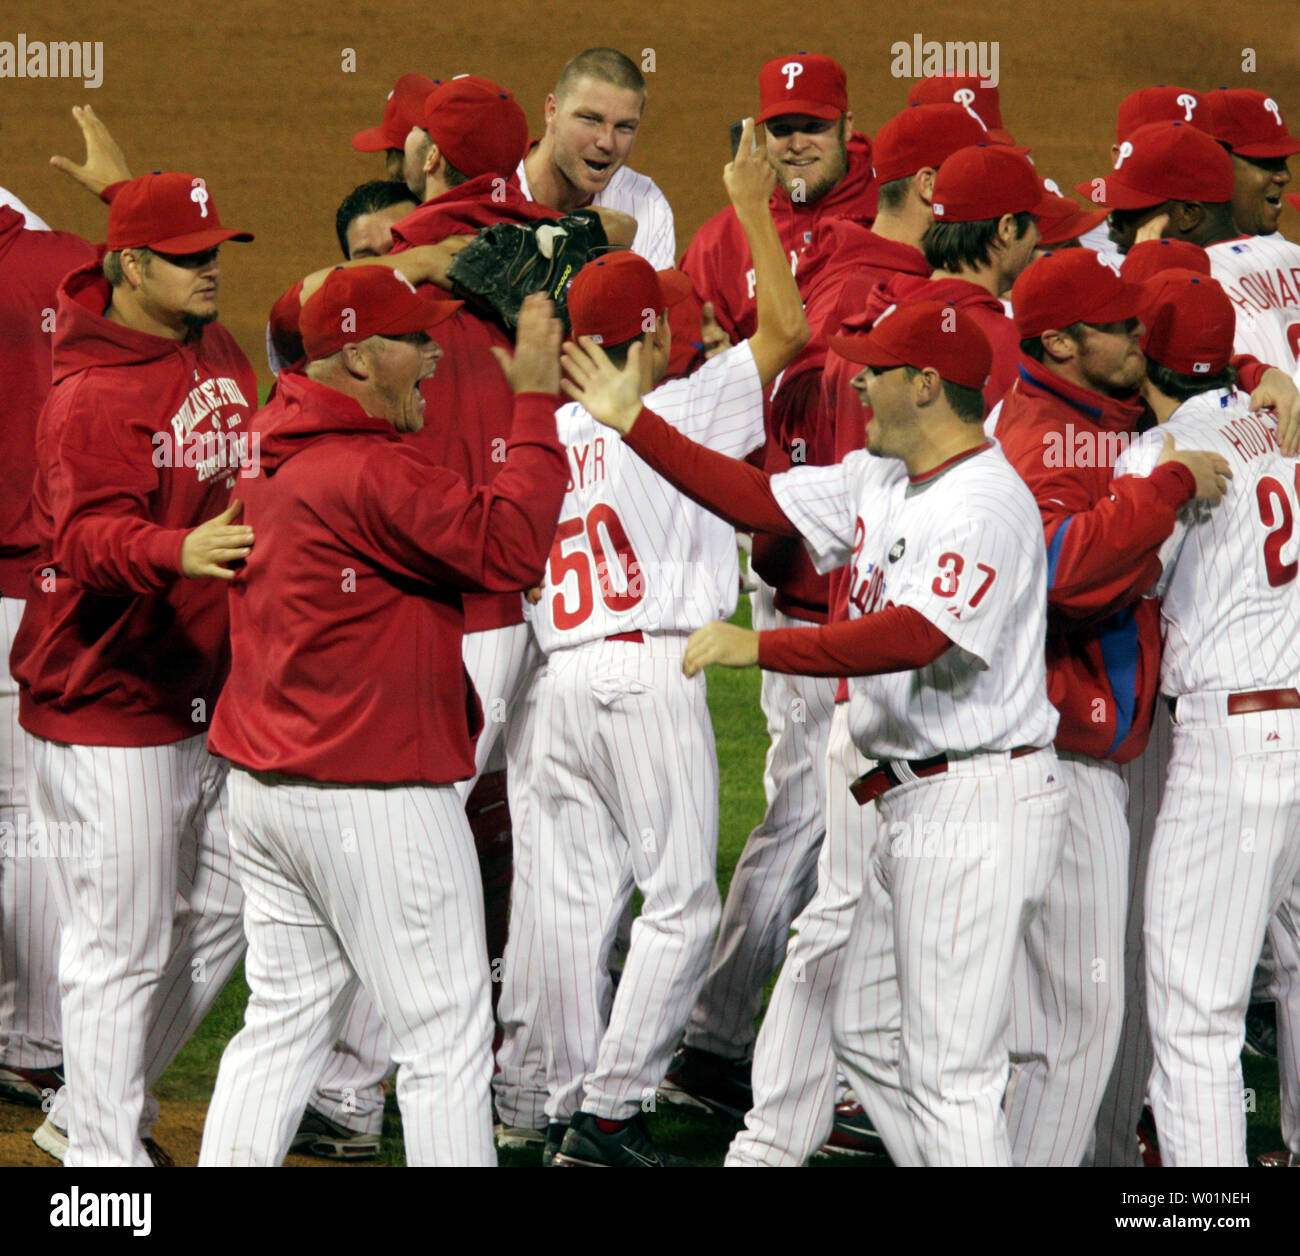 Philadelphia Phillies team members high five each other as they celebrate on the field following their 10-4 win over the Los Angeles Dodgers in game five of the National League Championship Series in Philadelphia on October 21, 2009.  .      UPI/Eileen Angelino Stock Photo